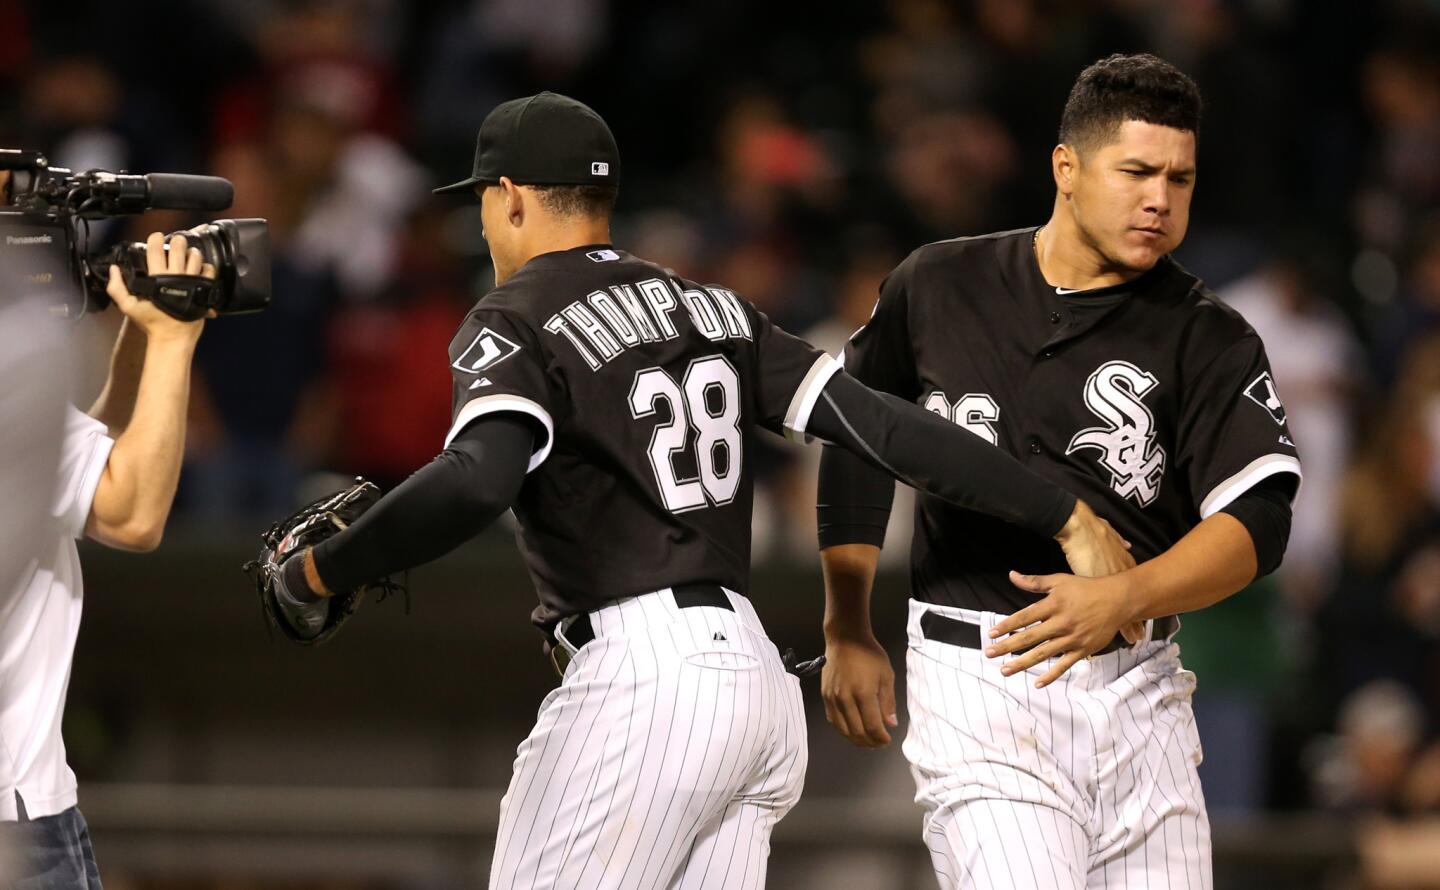 Trayce Thompson and Avisail Garcia celebrate after the win.